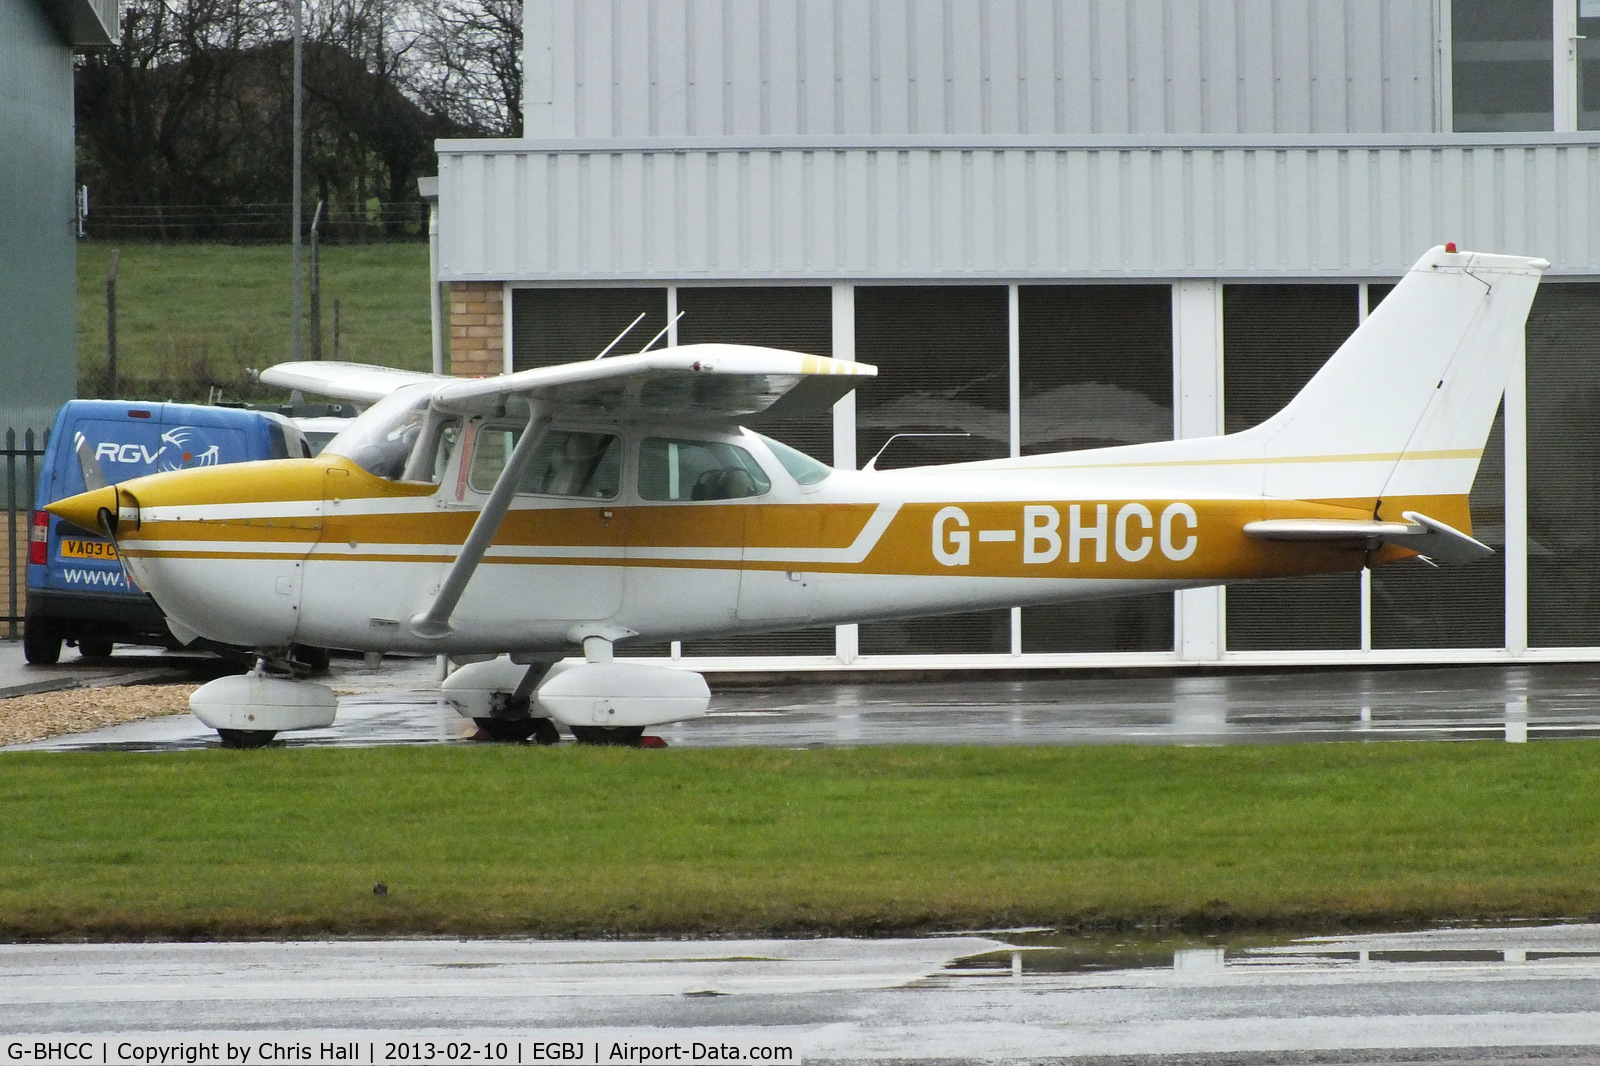 G-BHCC, 1976 Cessna 172M C/N 172-66711, at Gloucestershire Airport